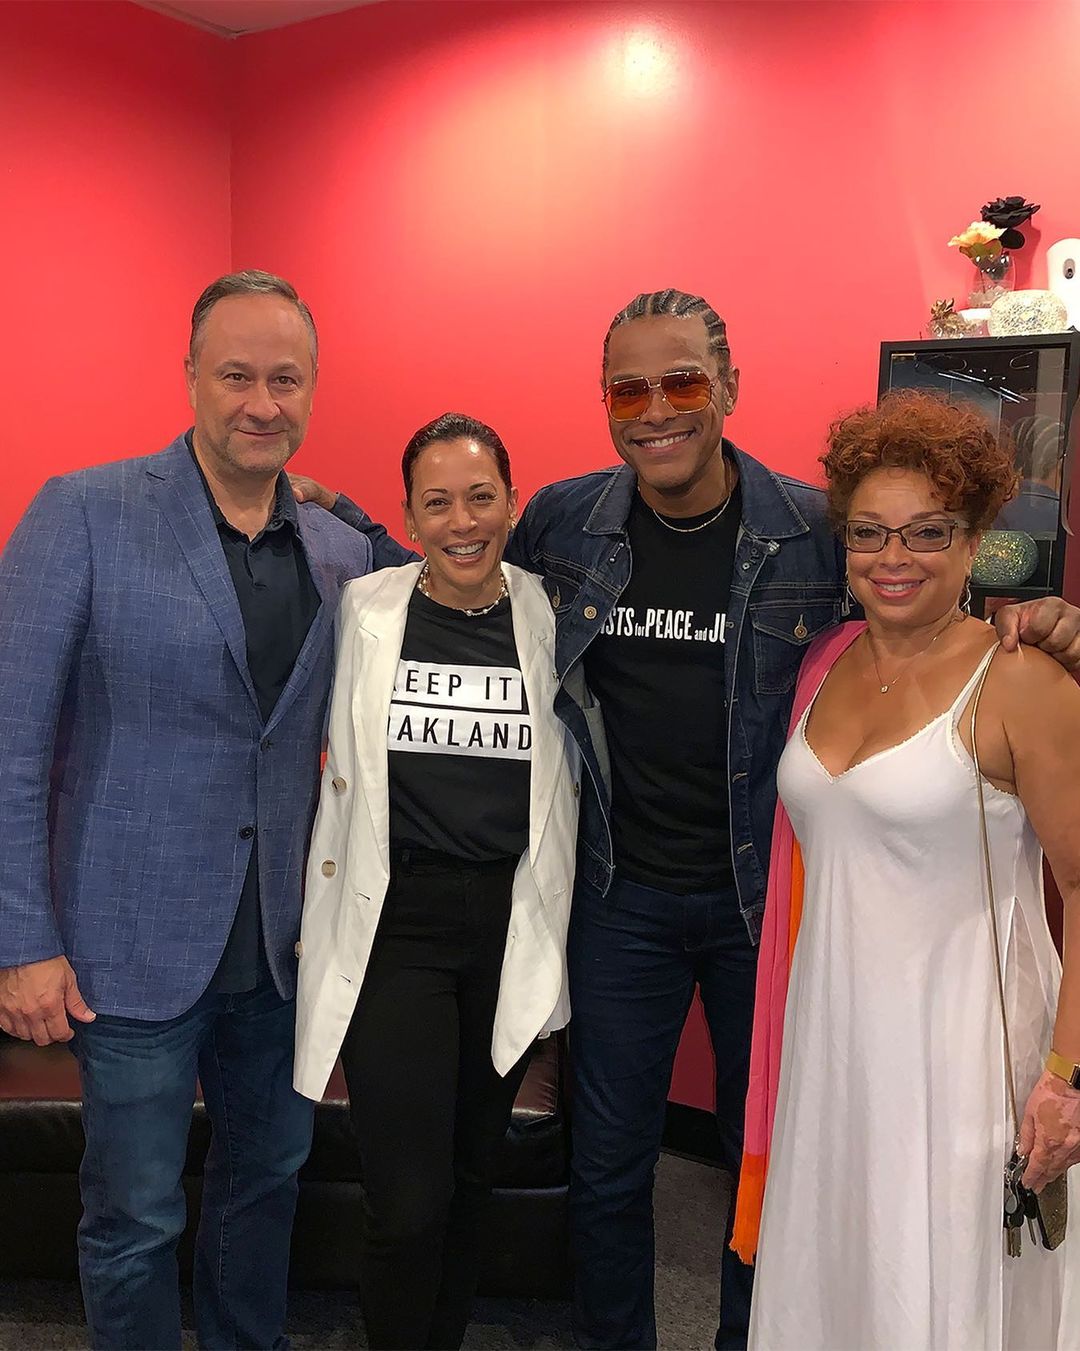 Pics Of Our Favorite Celebs With Vice President Kamala Harris